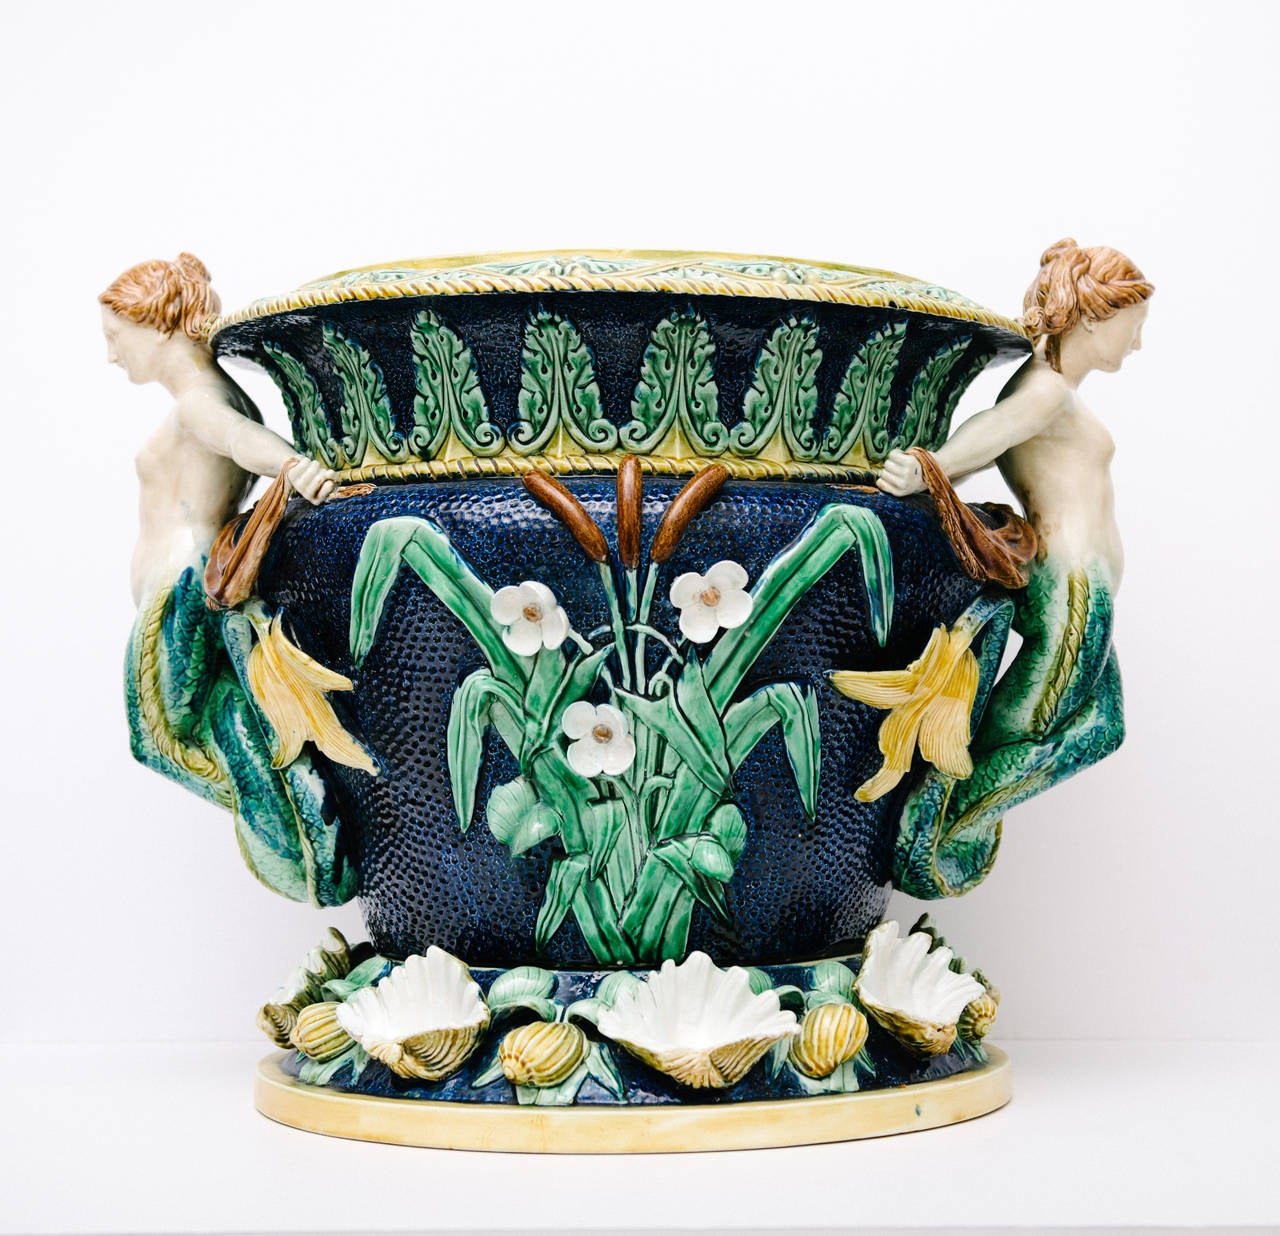 Monumental collector two piece mermaid majolica jardinaire beautifully embellished with clam shells, flora and fauna.